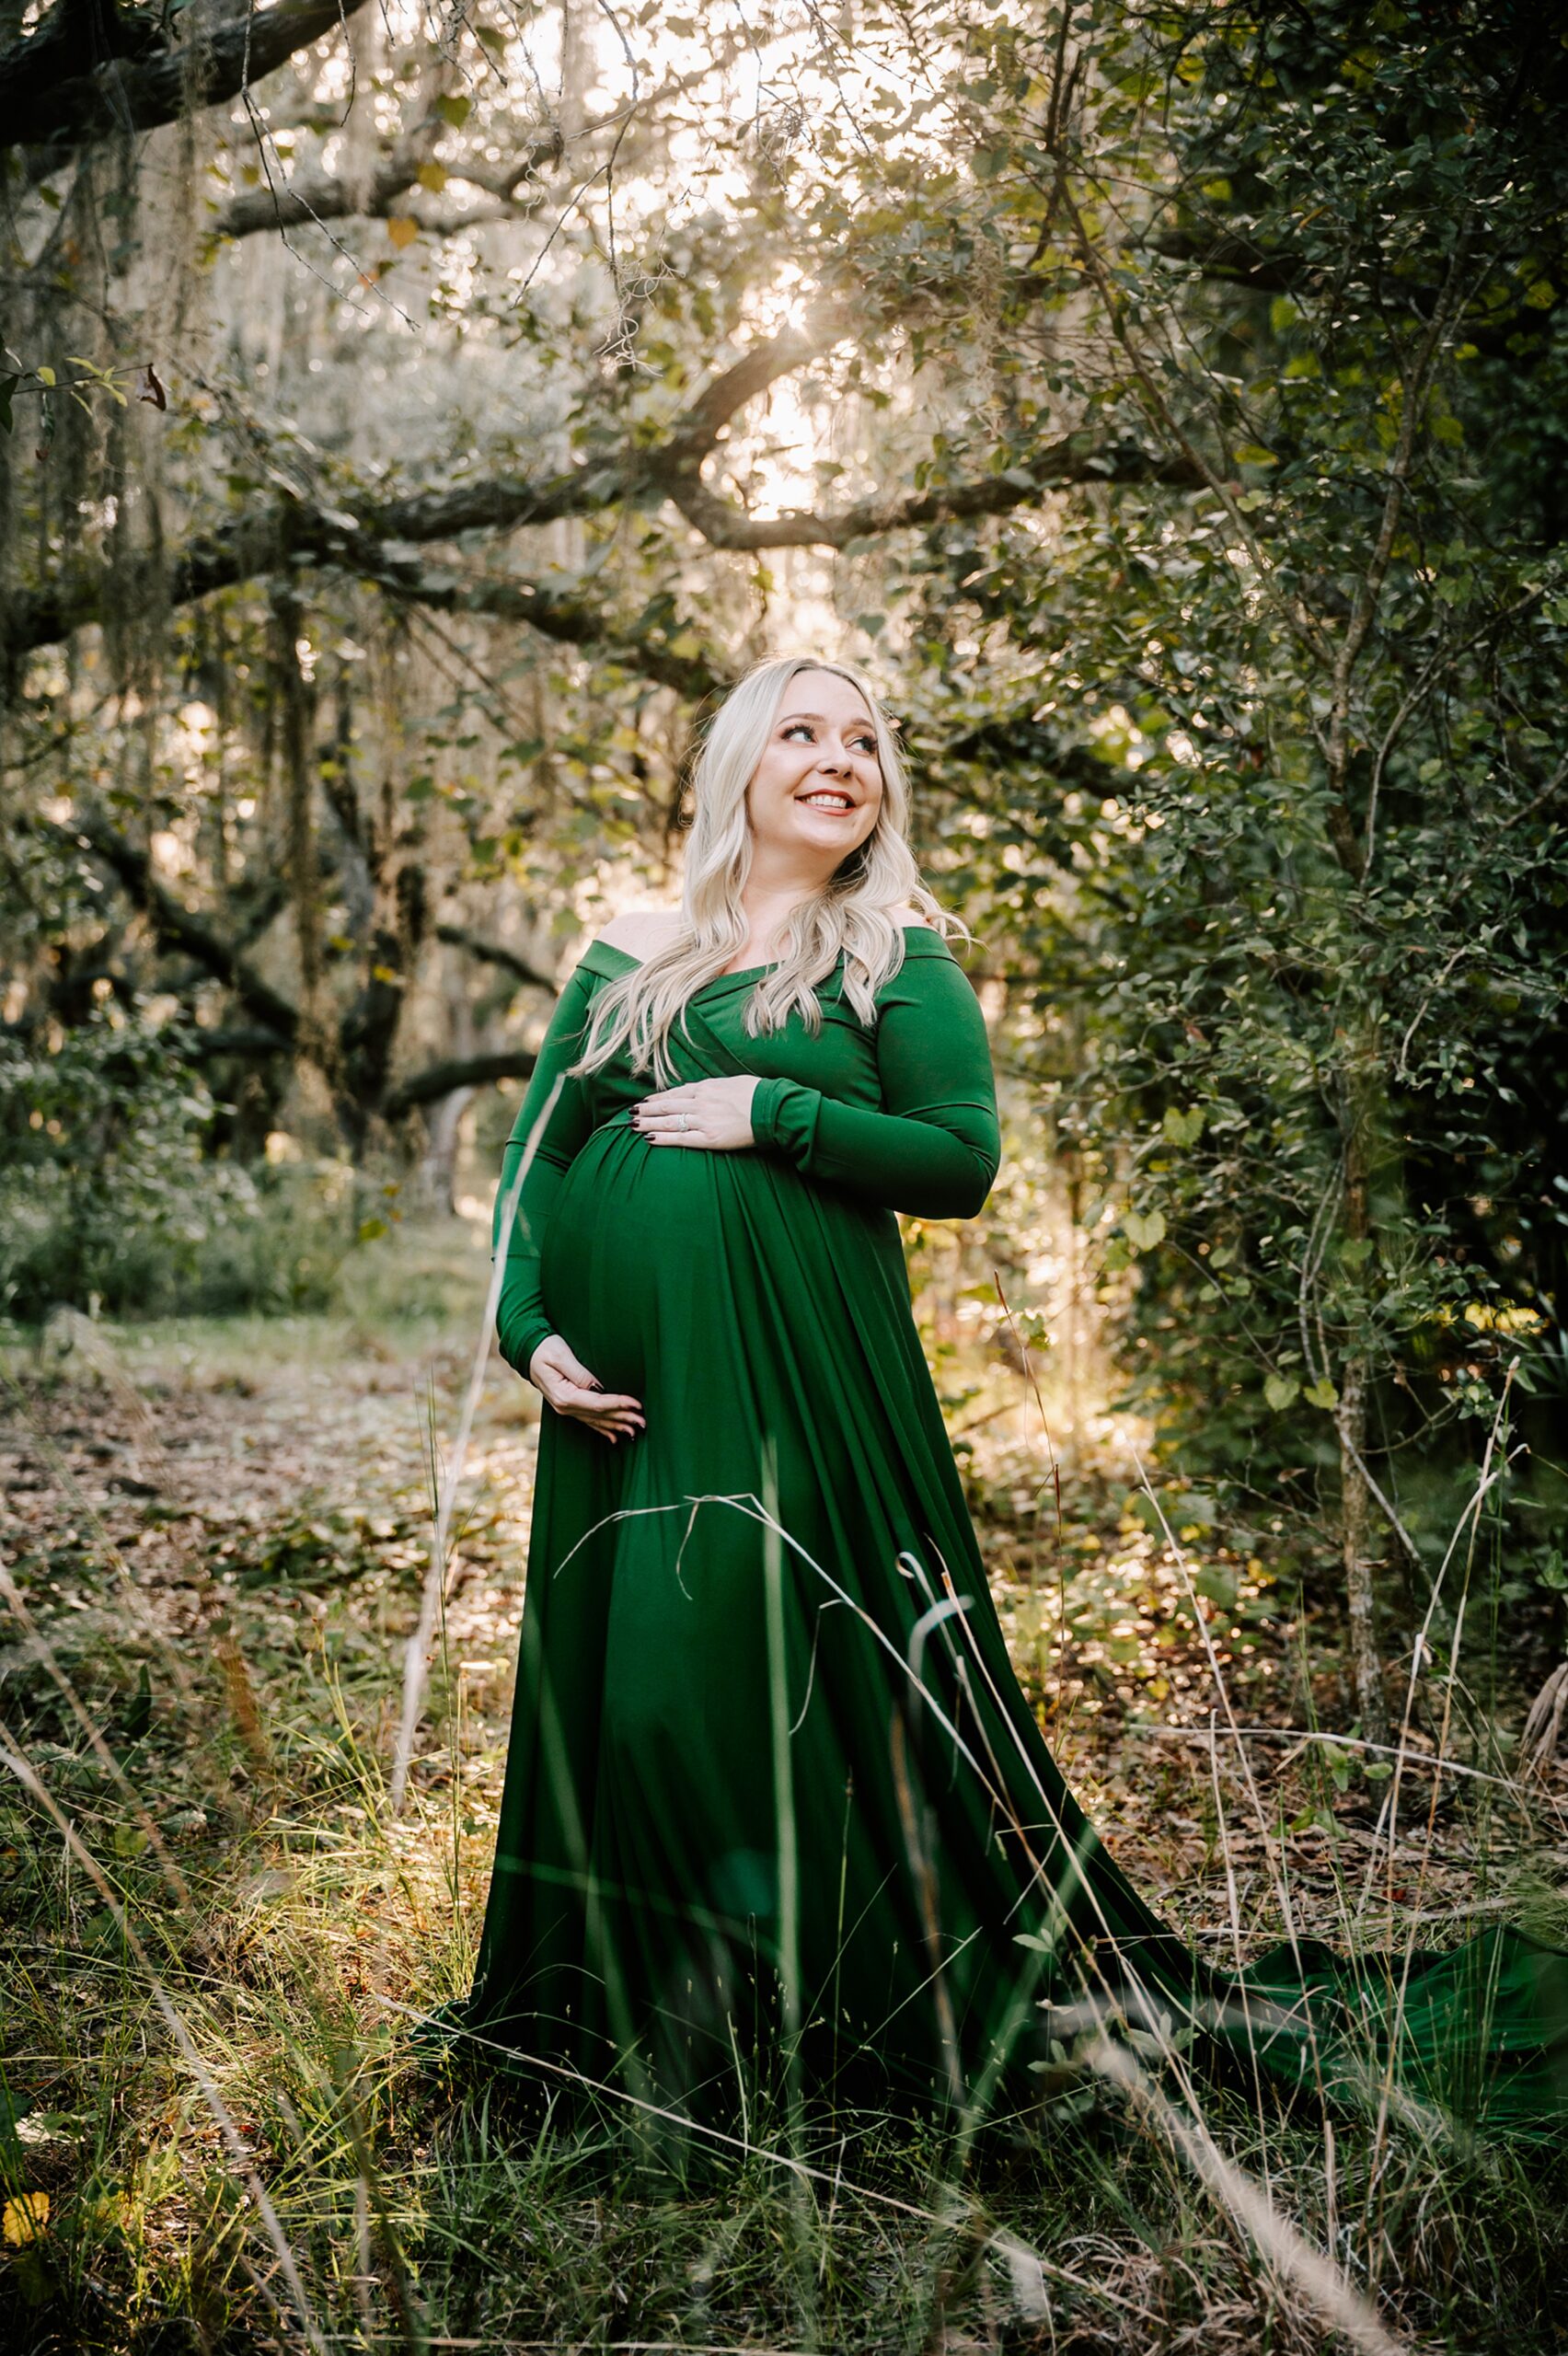 A mom to be stands in a forest at sunset in a green maternity dress while smiling over her shoulder